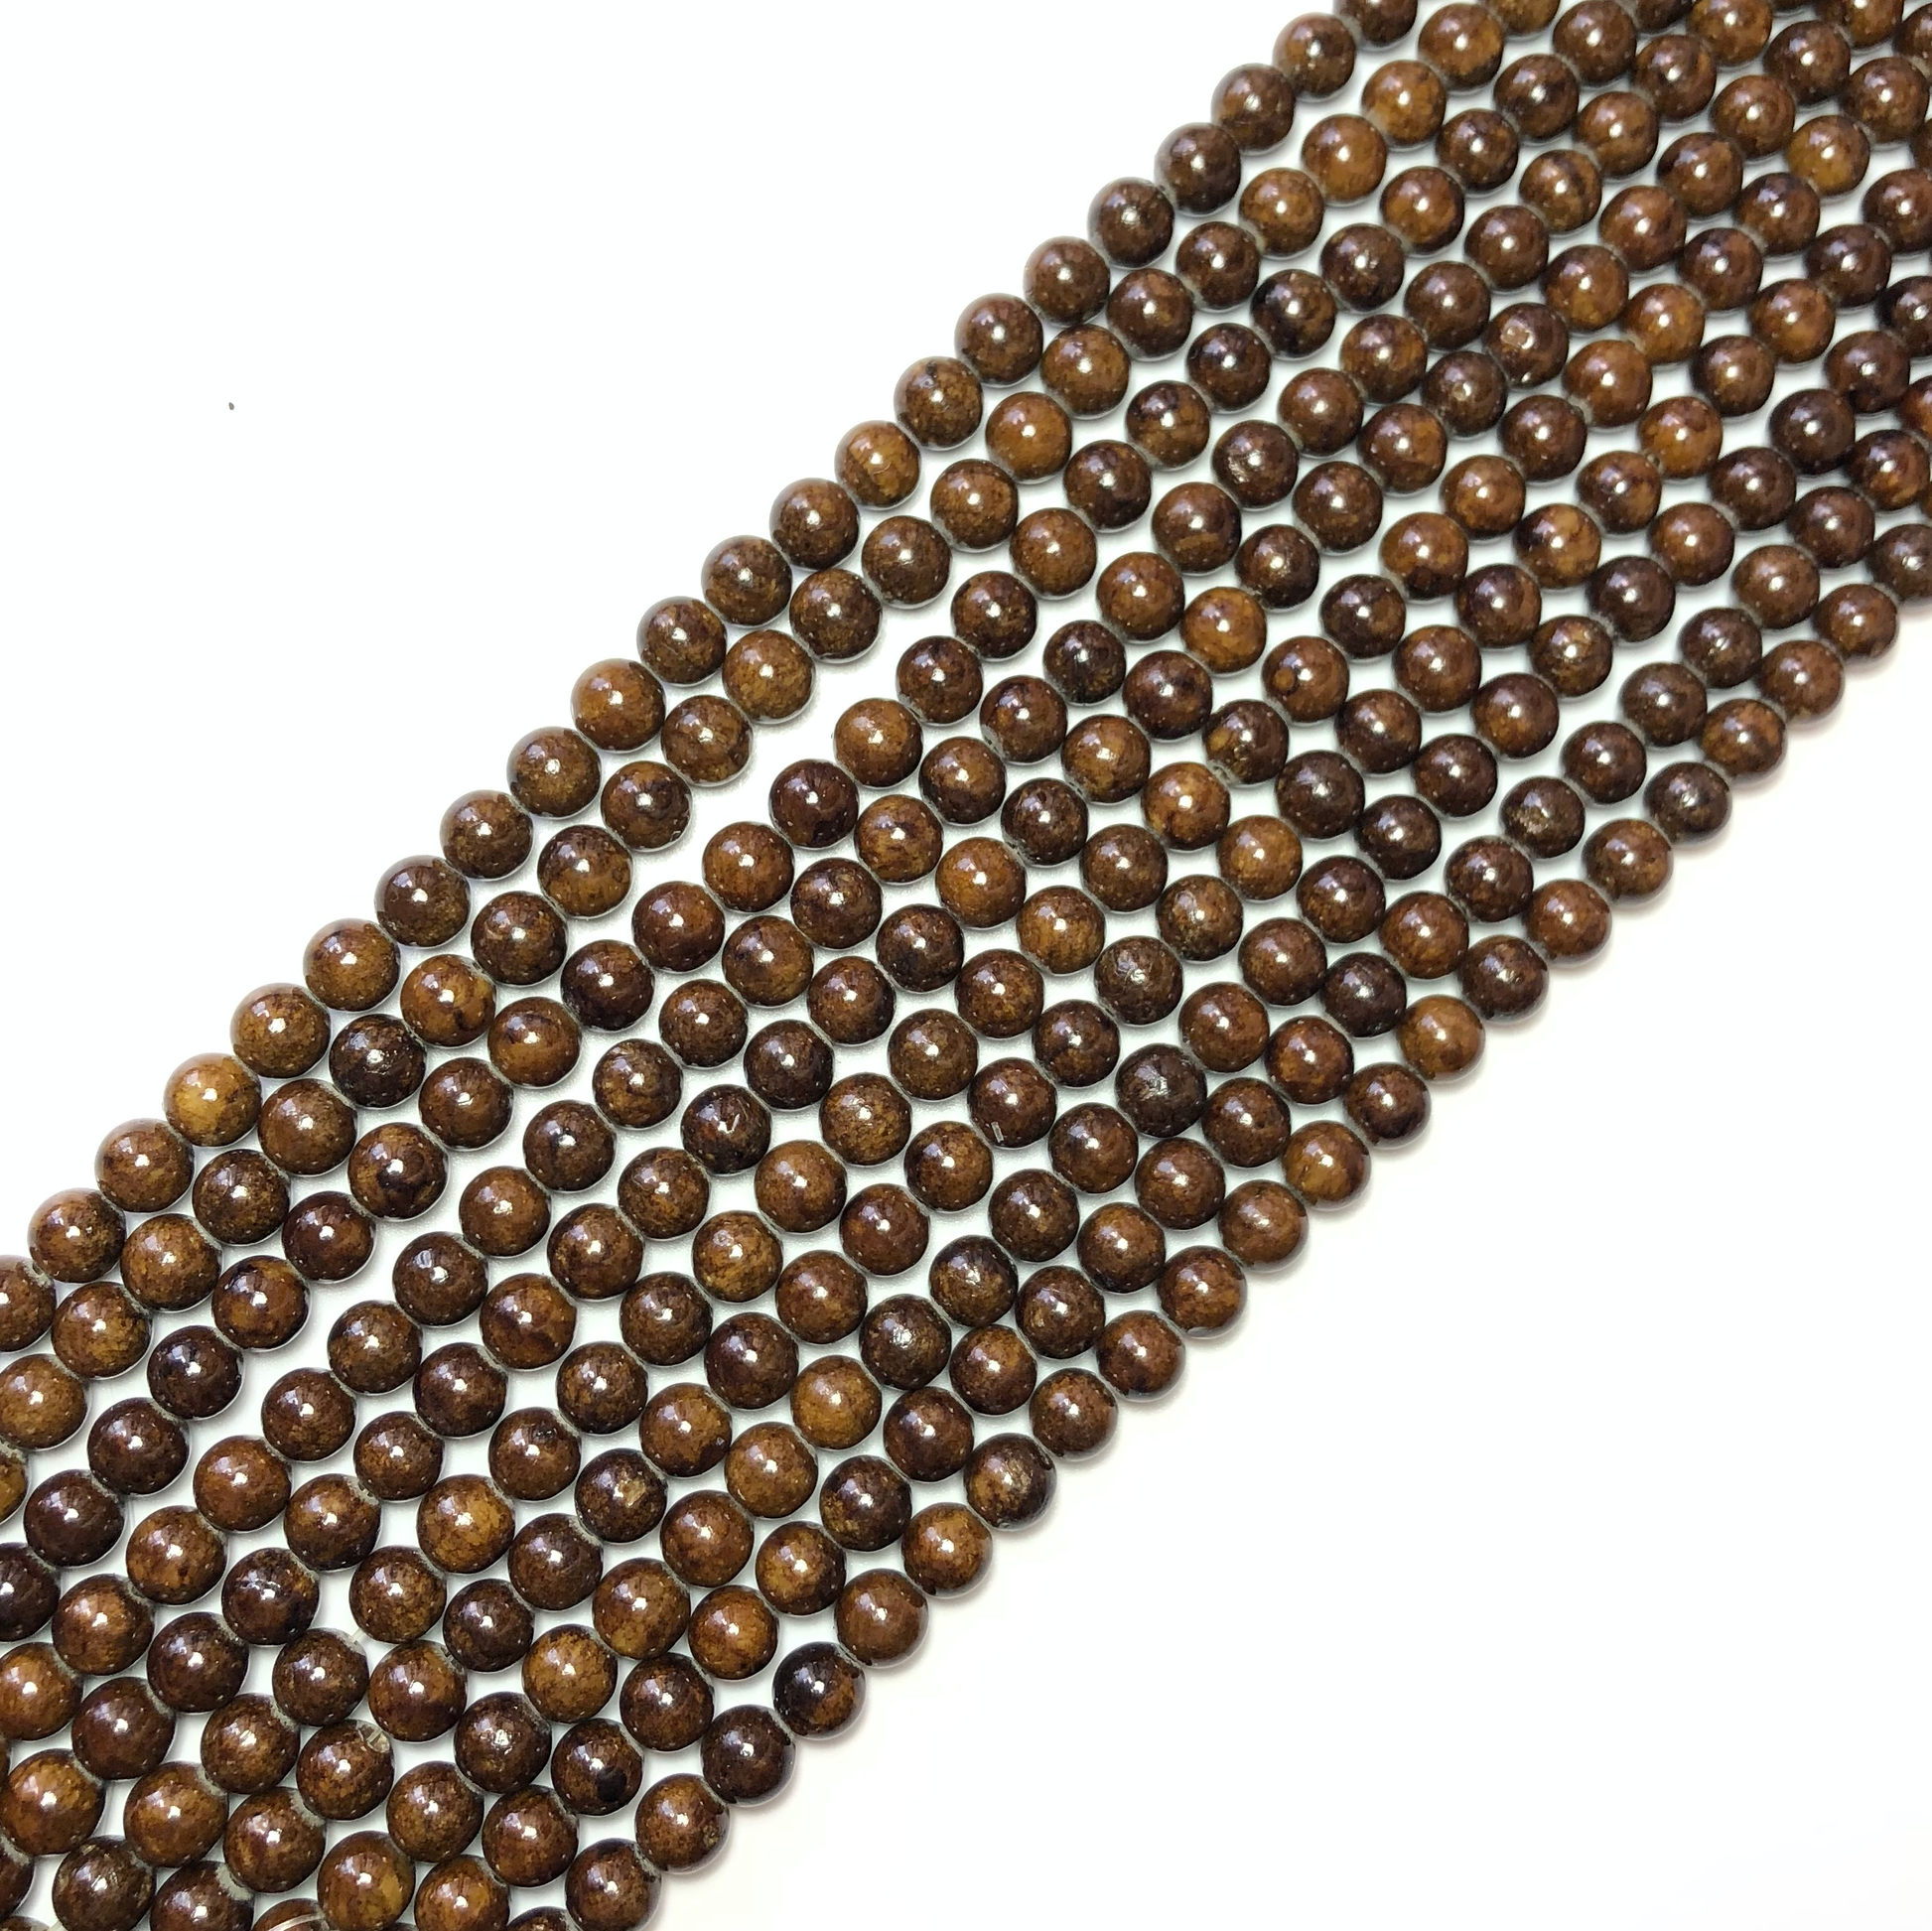 2 Strands/lot 8mm, 10mm Natural Brown Jade Round Stone Beads Stone Beads 8mm Stone Beads Round Jade Beads Charms Beads Beyond